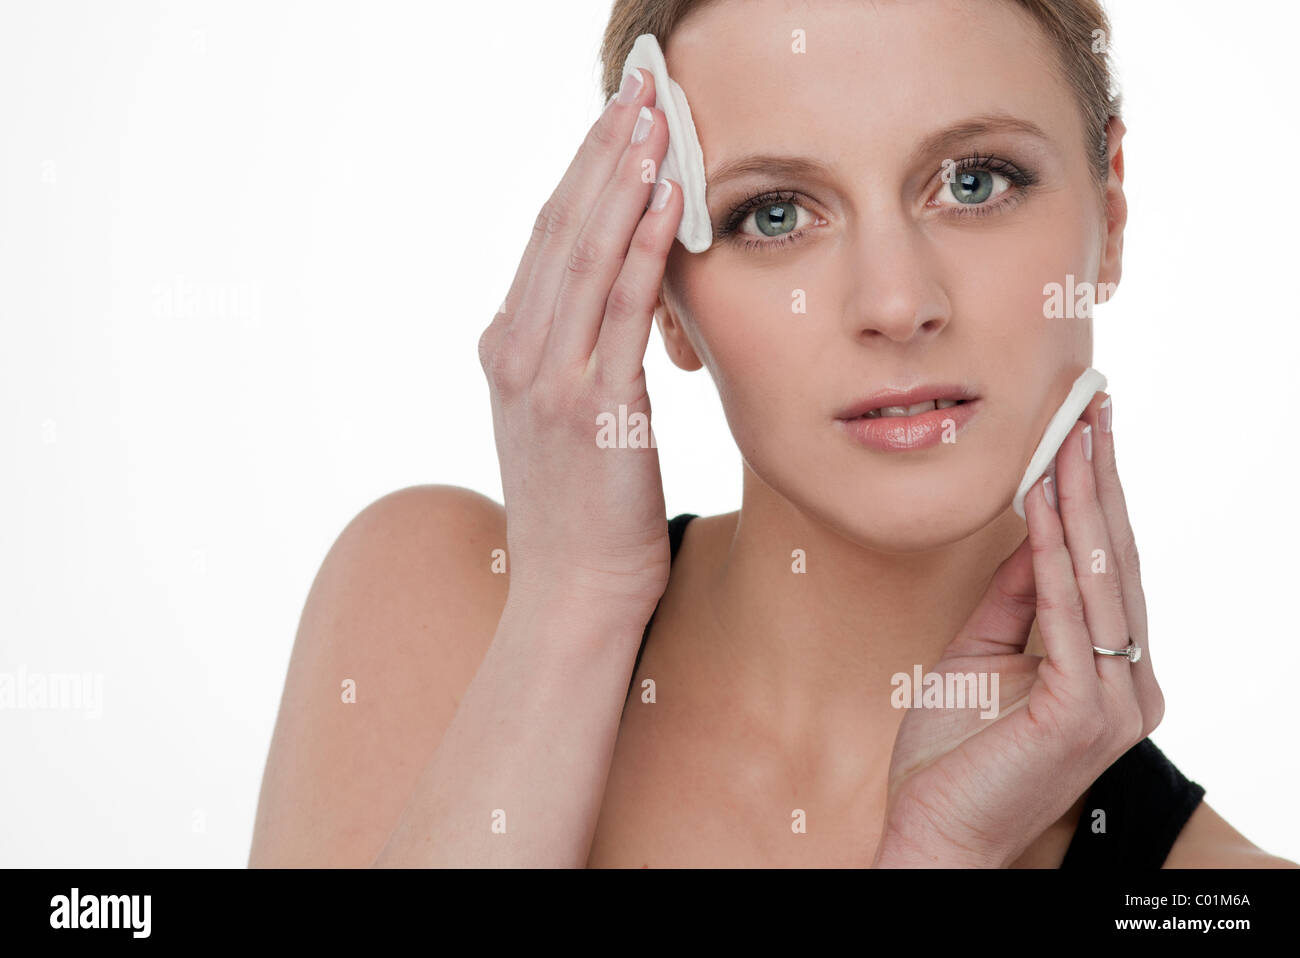 Blonde woman removing make up with <b>cotton wool</b> pads Stock Photo - blonde-woman-removing-make-up-with-cotton-wool-pads-C01M6A